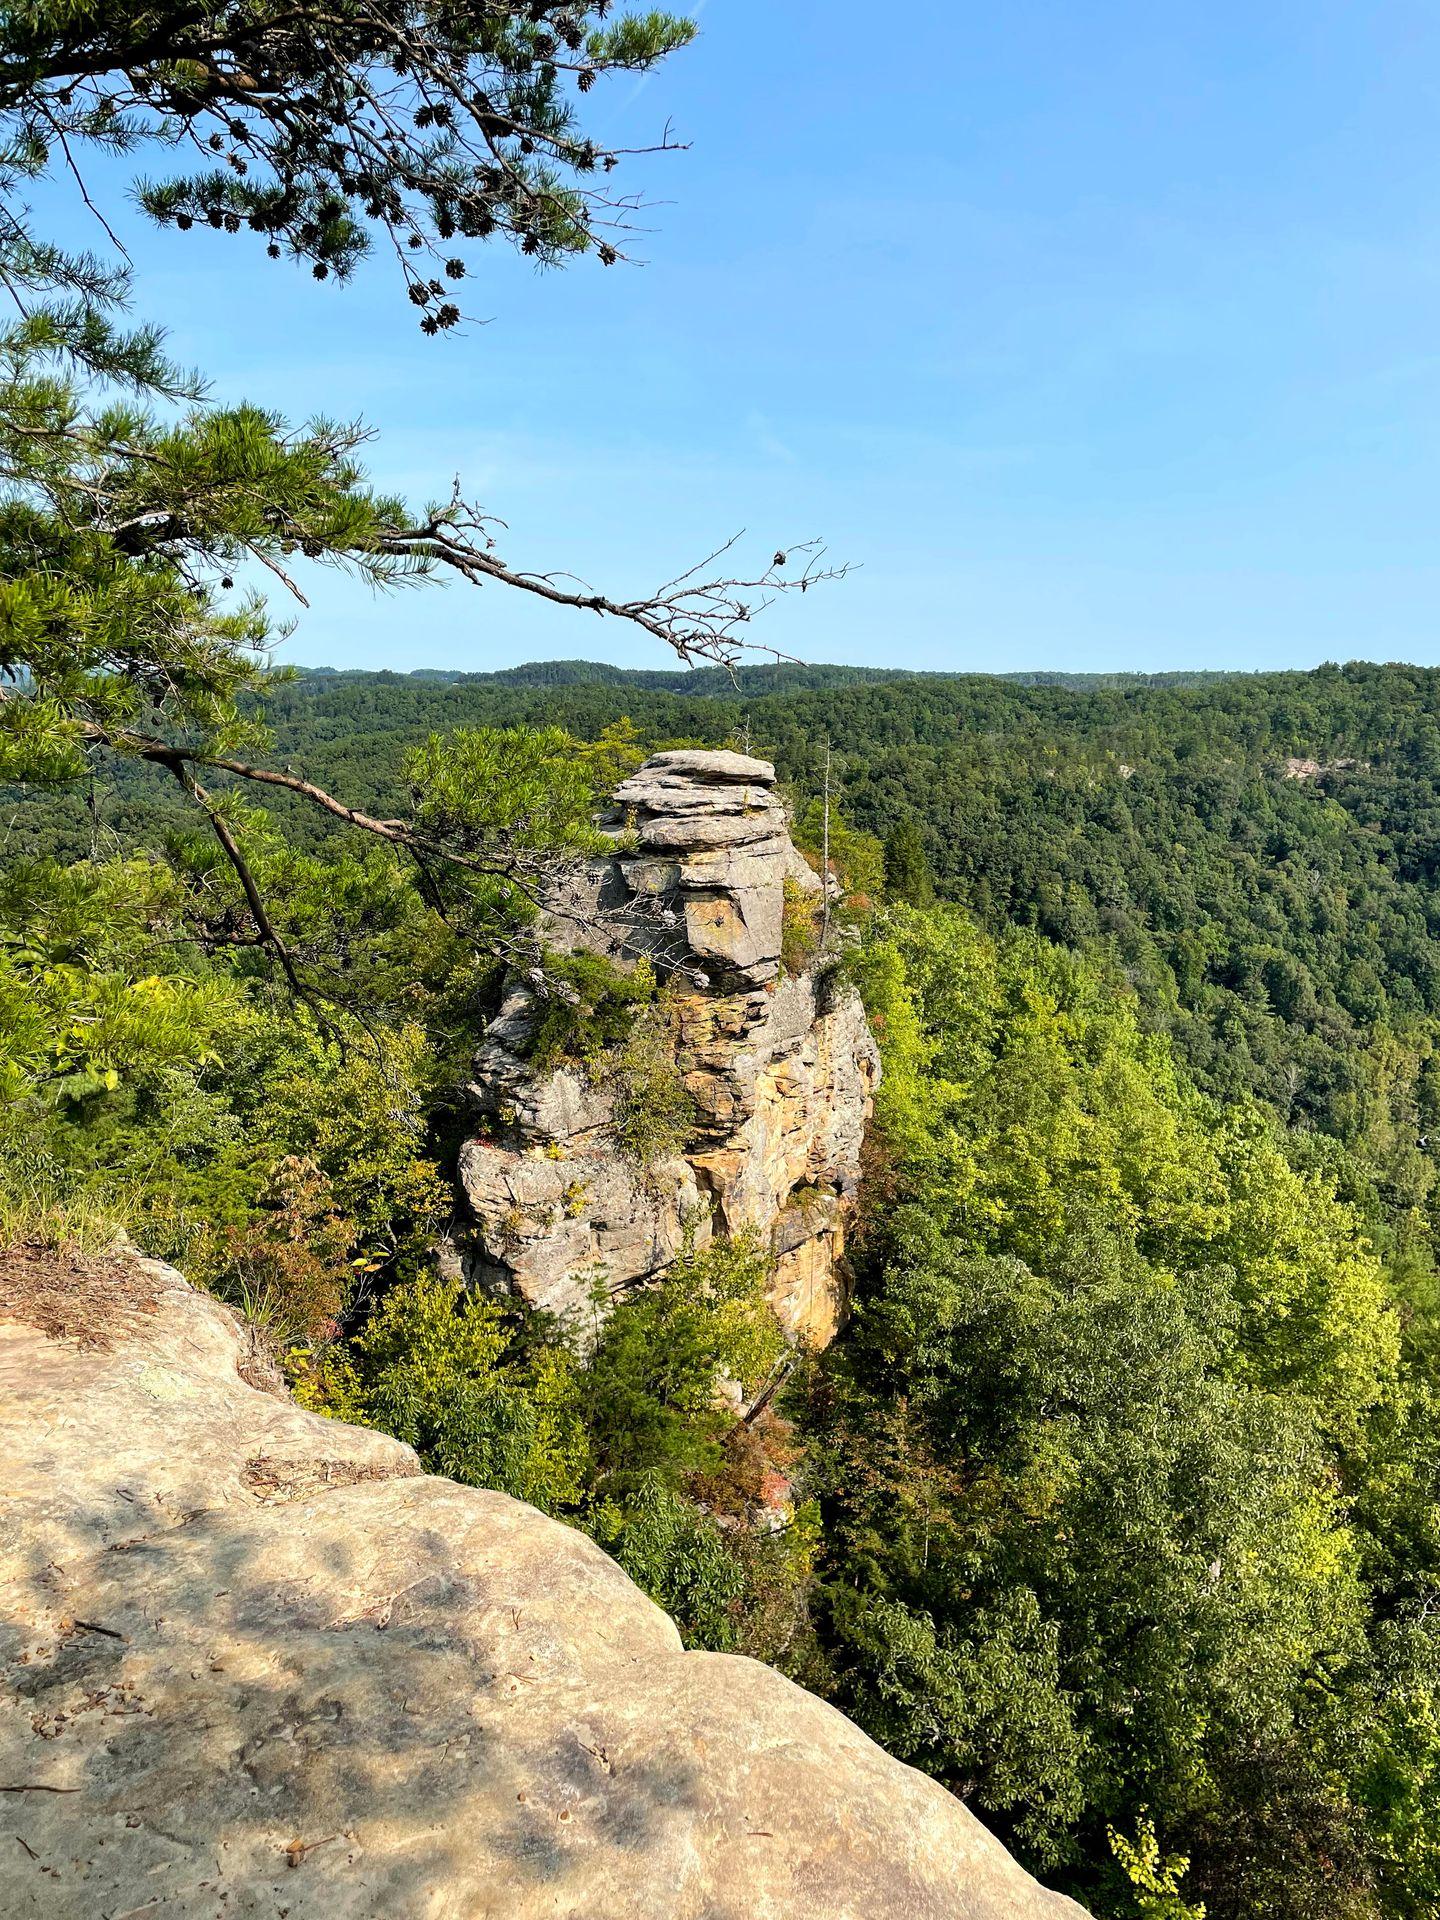 A rock formation in Natural Bridge State Park